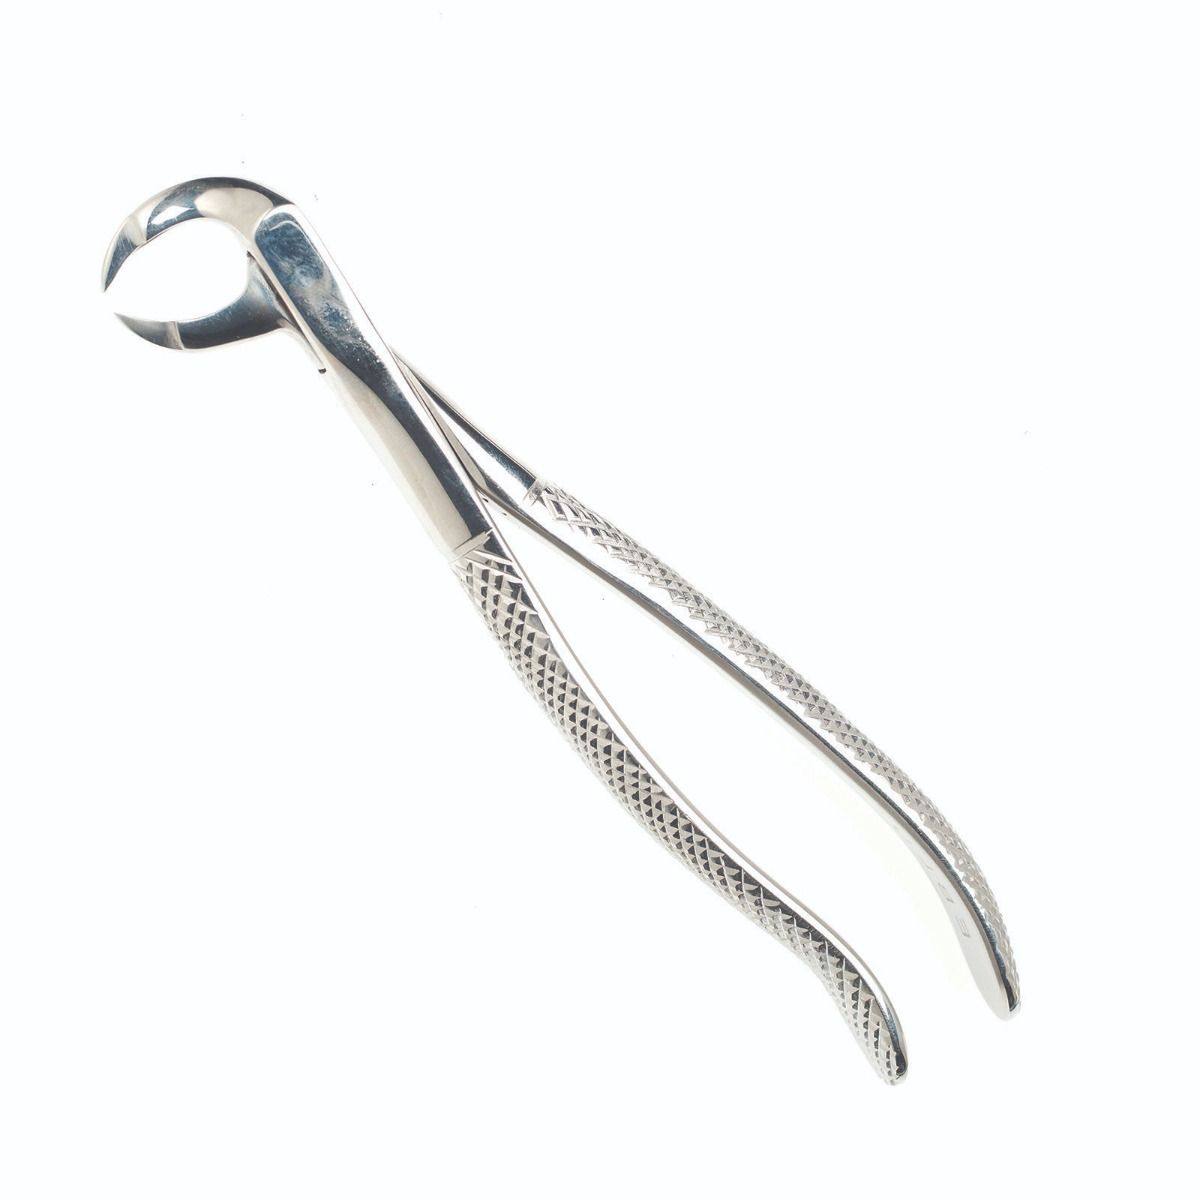 Eagle Claw 03040-008 Hook Remover, Forceps,Black : Industrial & Scientific  